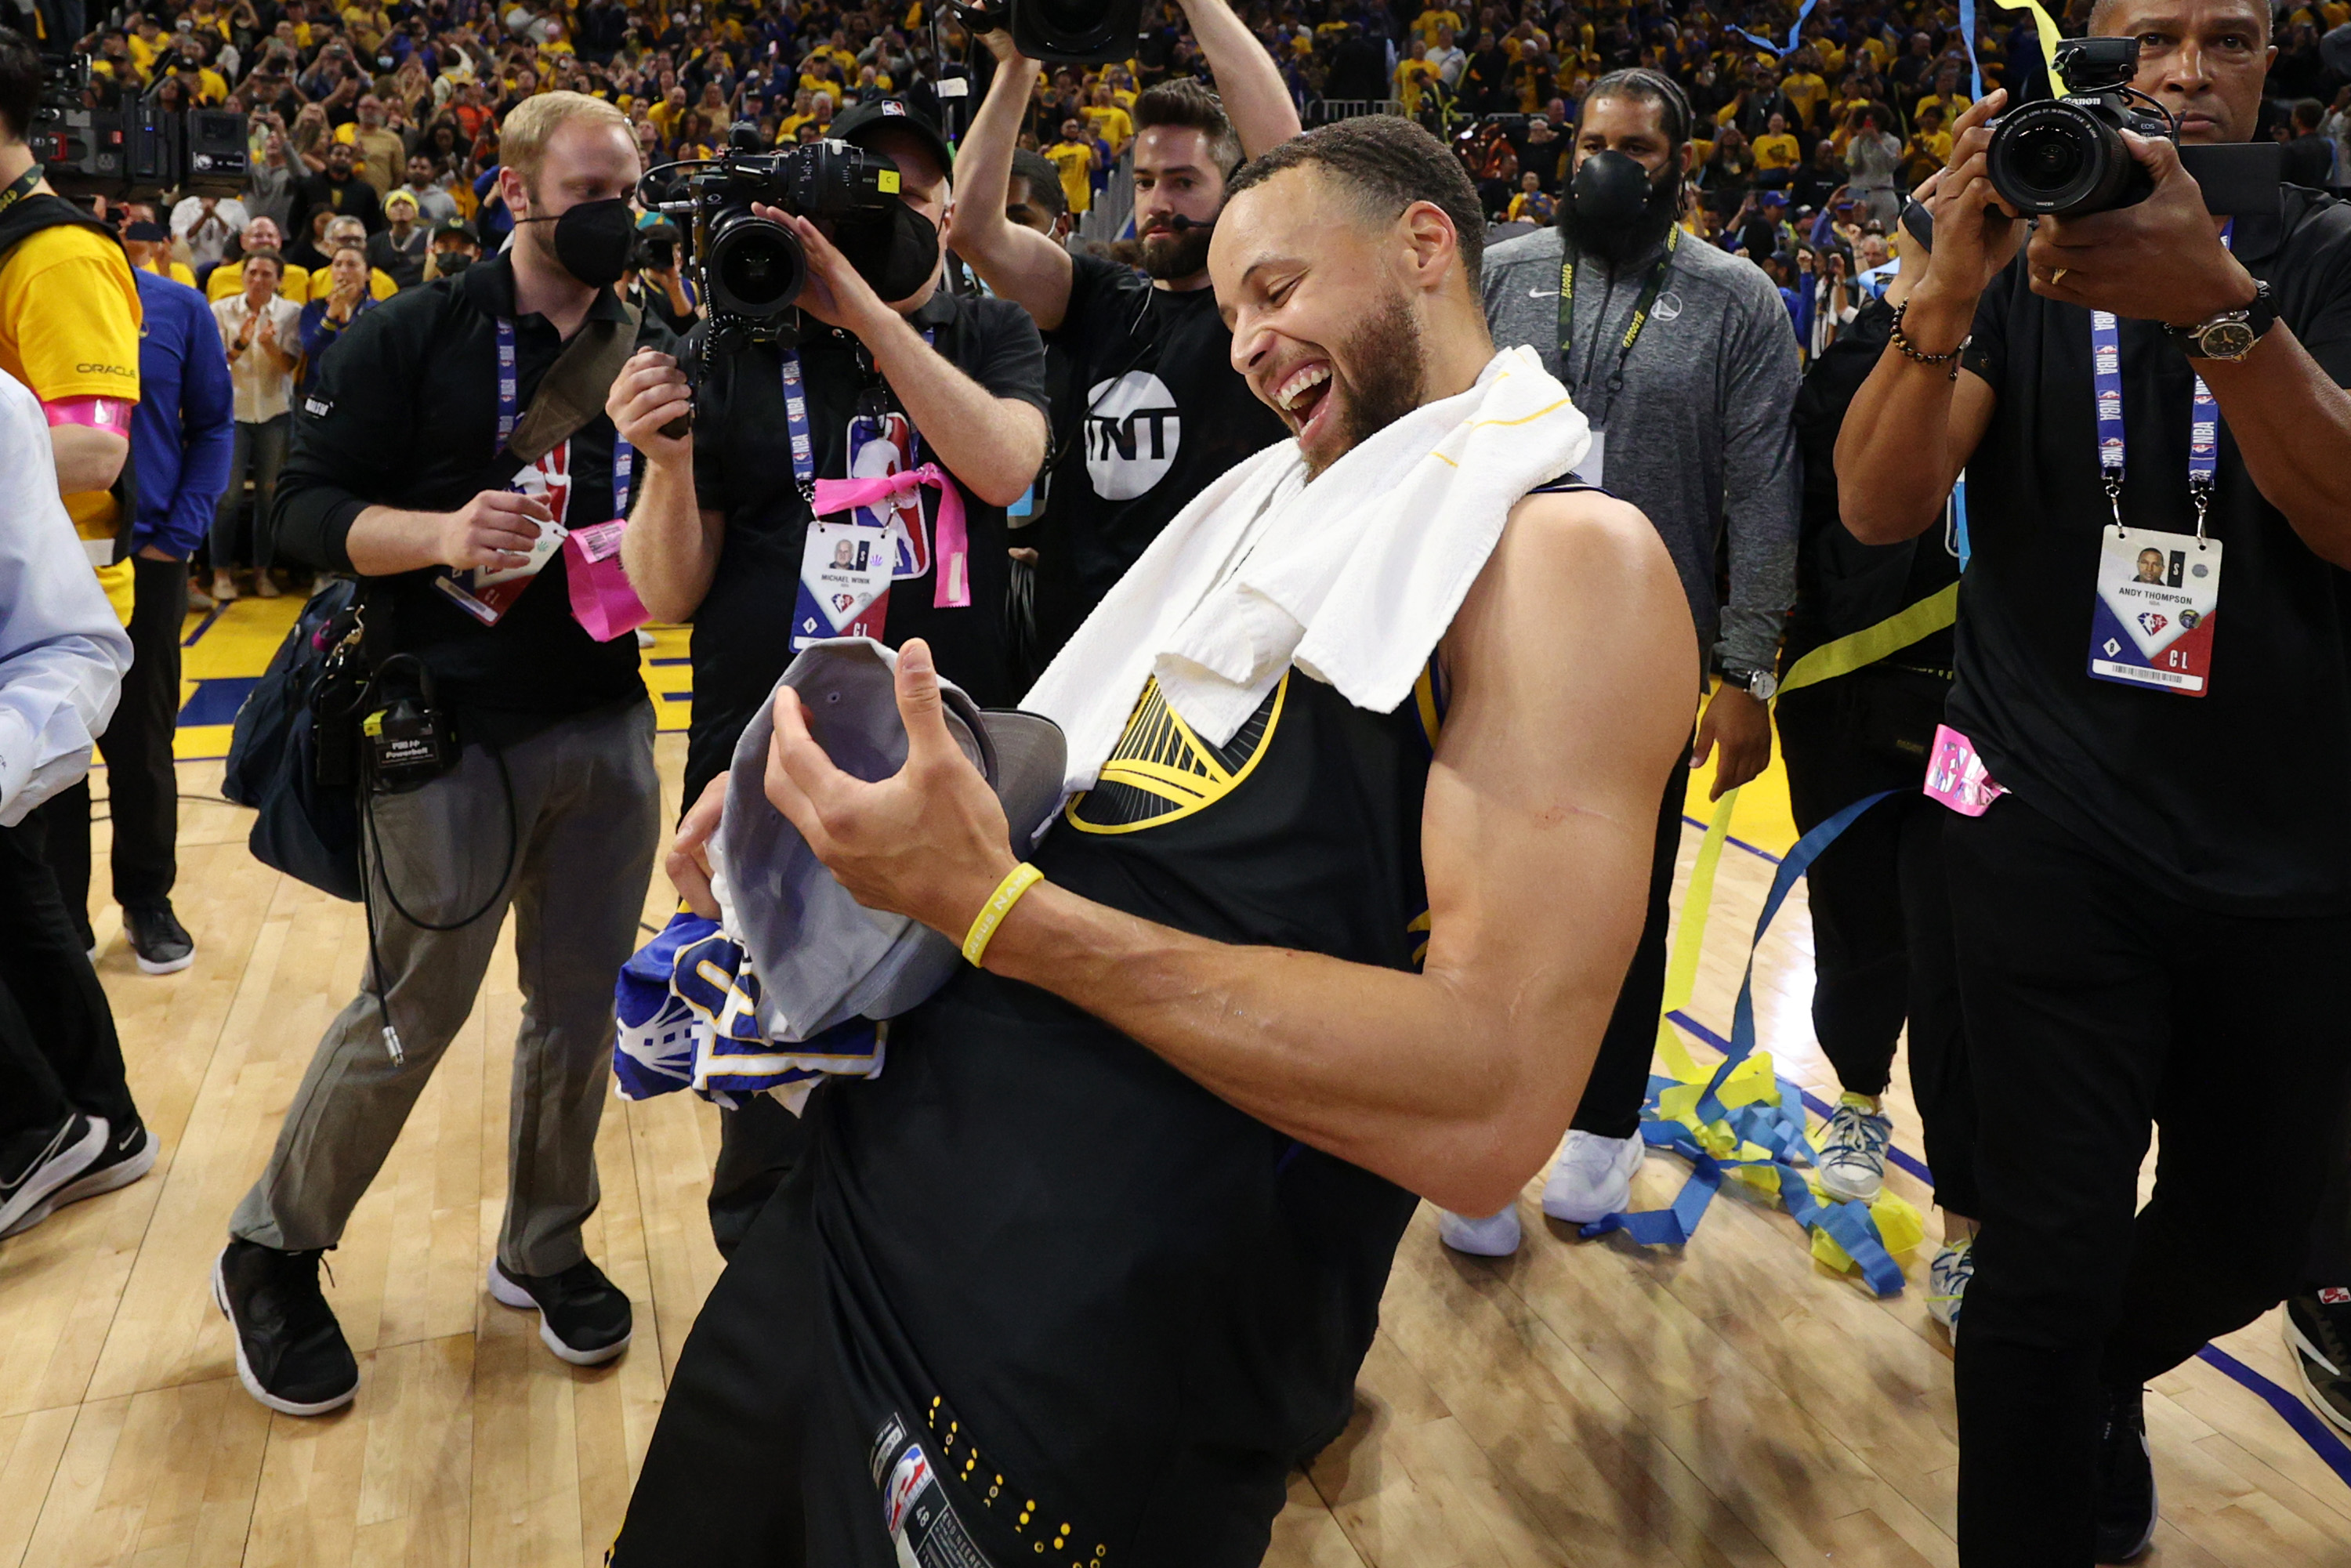 Stephen Curry #30 of the Golden State Warriors celebrates after the 120-110 win against the Dallas Mavericks to advance to the NBA Finals in Game Five of the 2022 NBA Playoffs Western Conference Finals at Chase Center on May 26, 2022 in San Francisco, California. (Photo by Ezra Shaw/Getty Images)